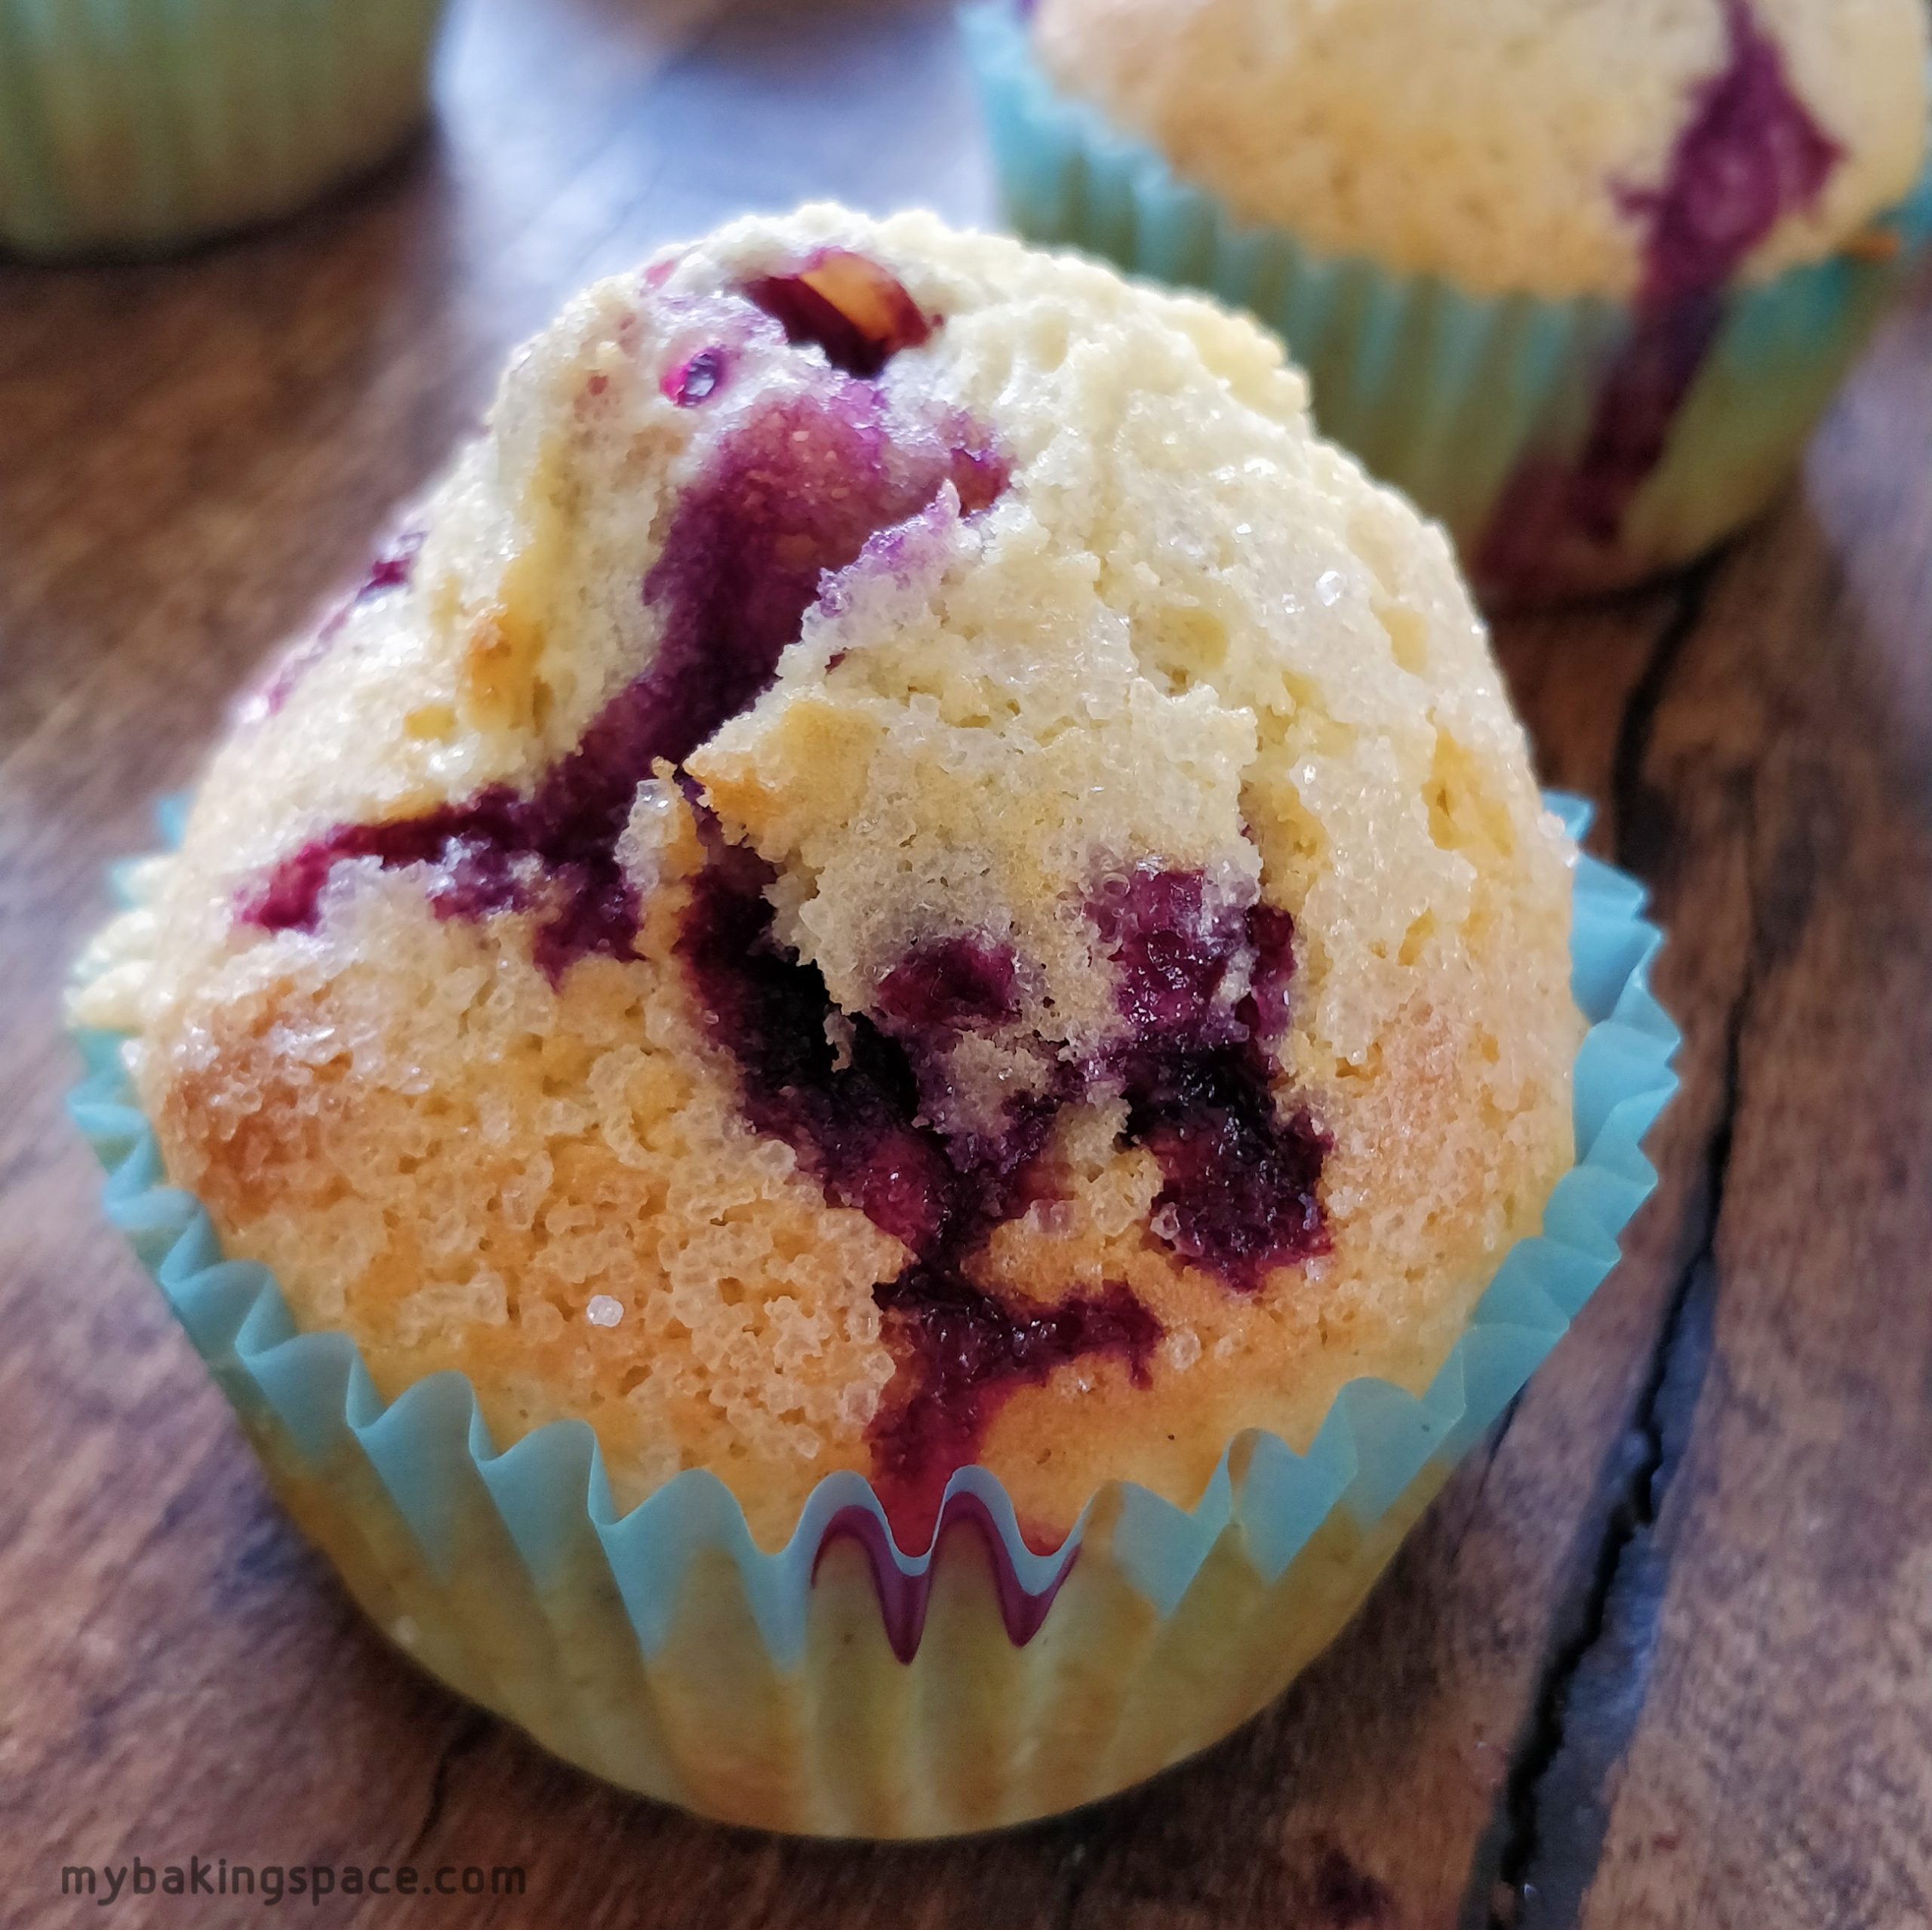 Blueberry Vanilla Muffins with A Crunch! – My baking space